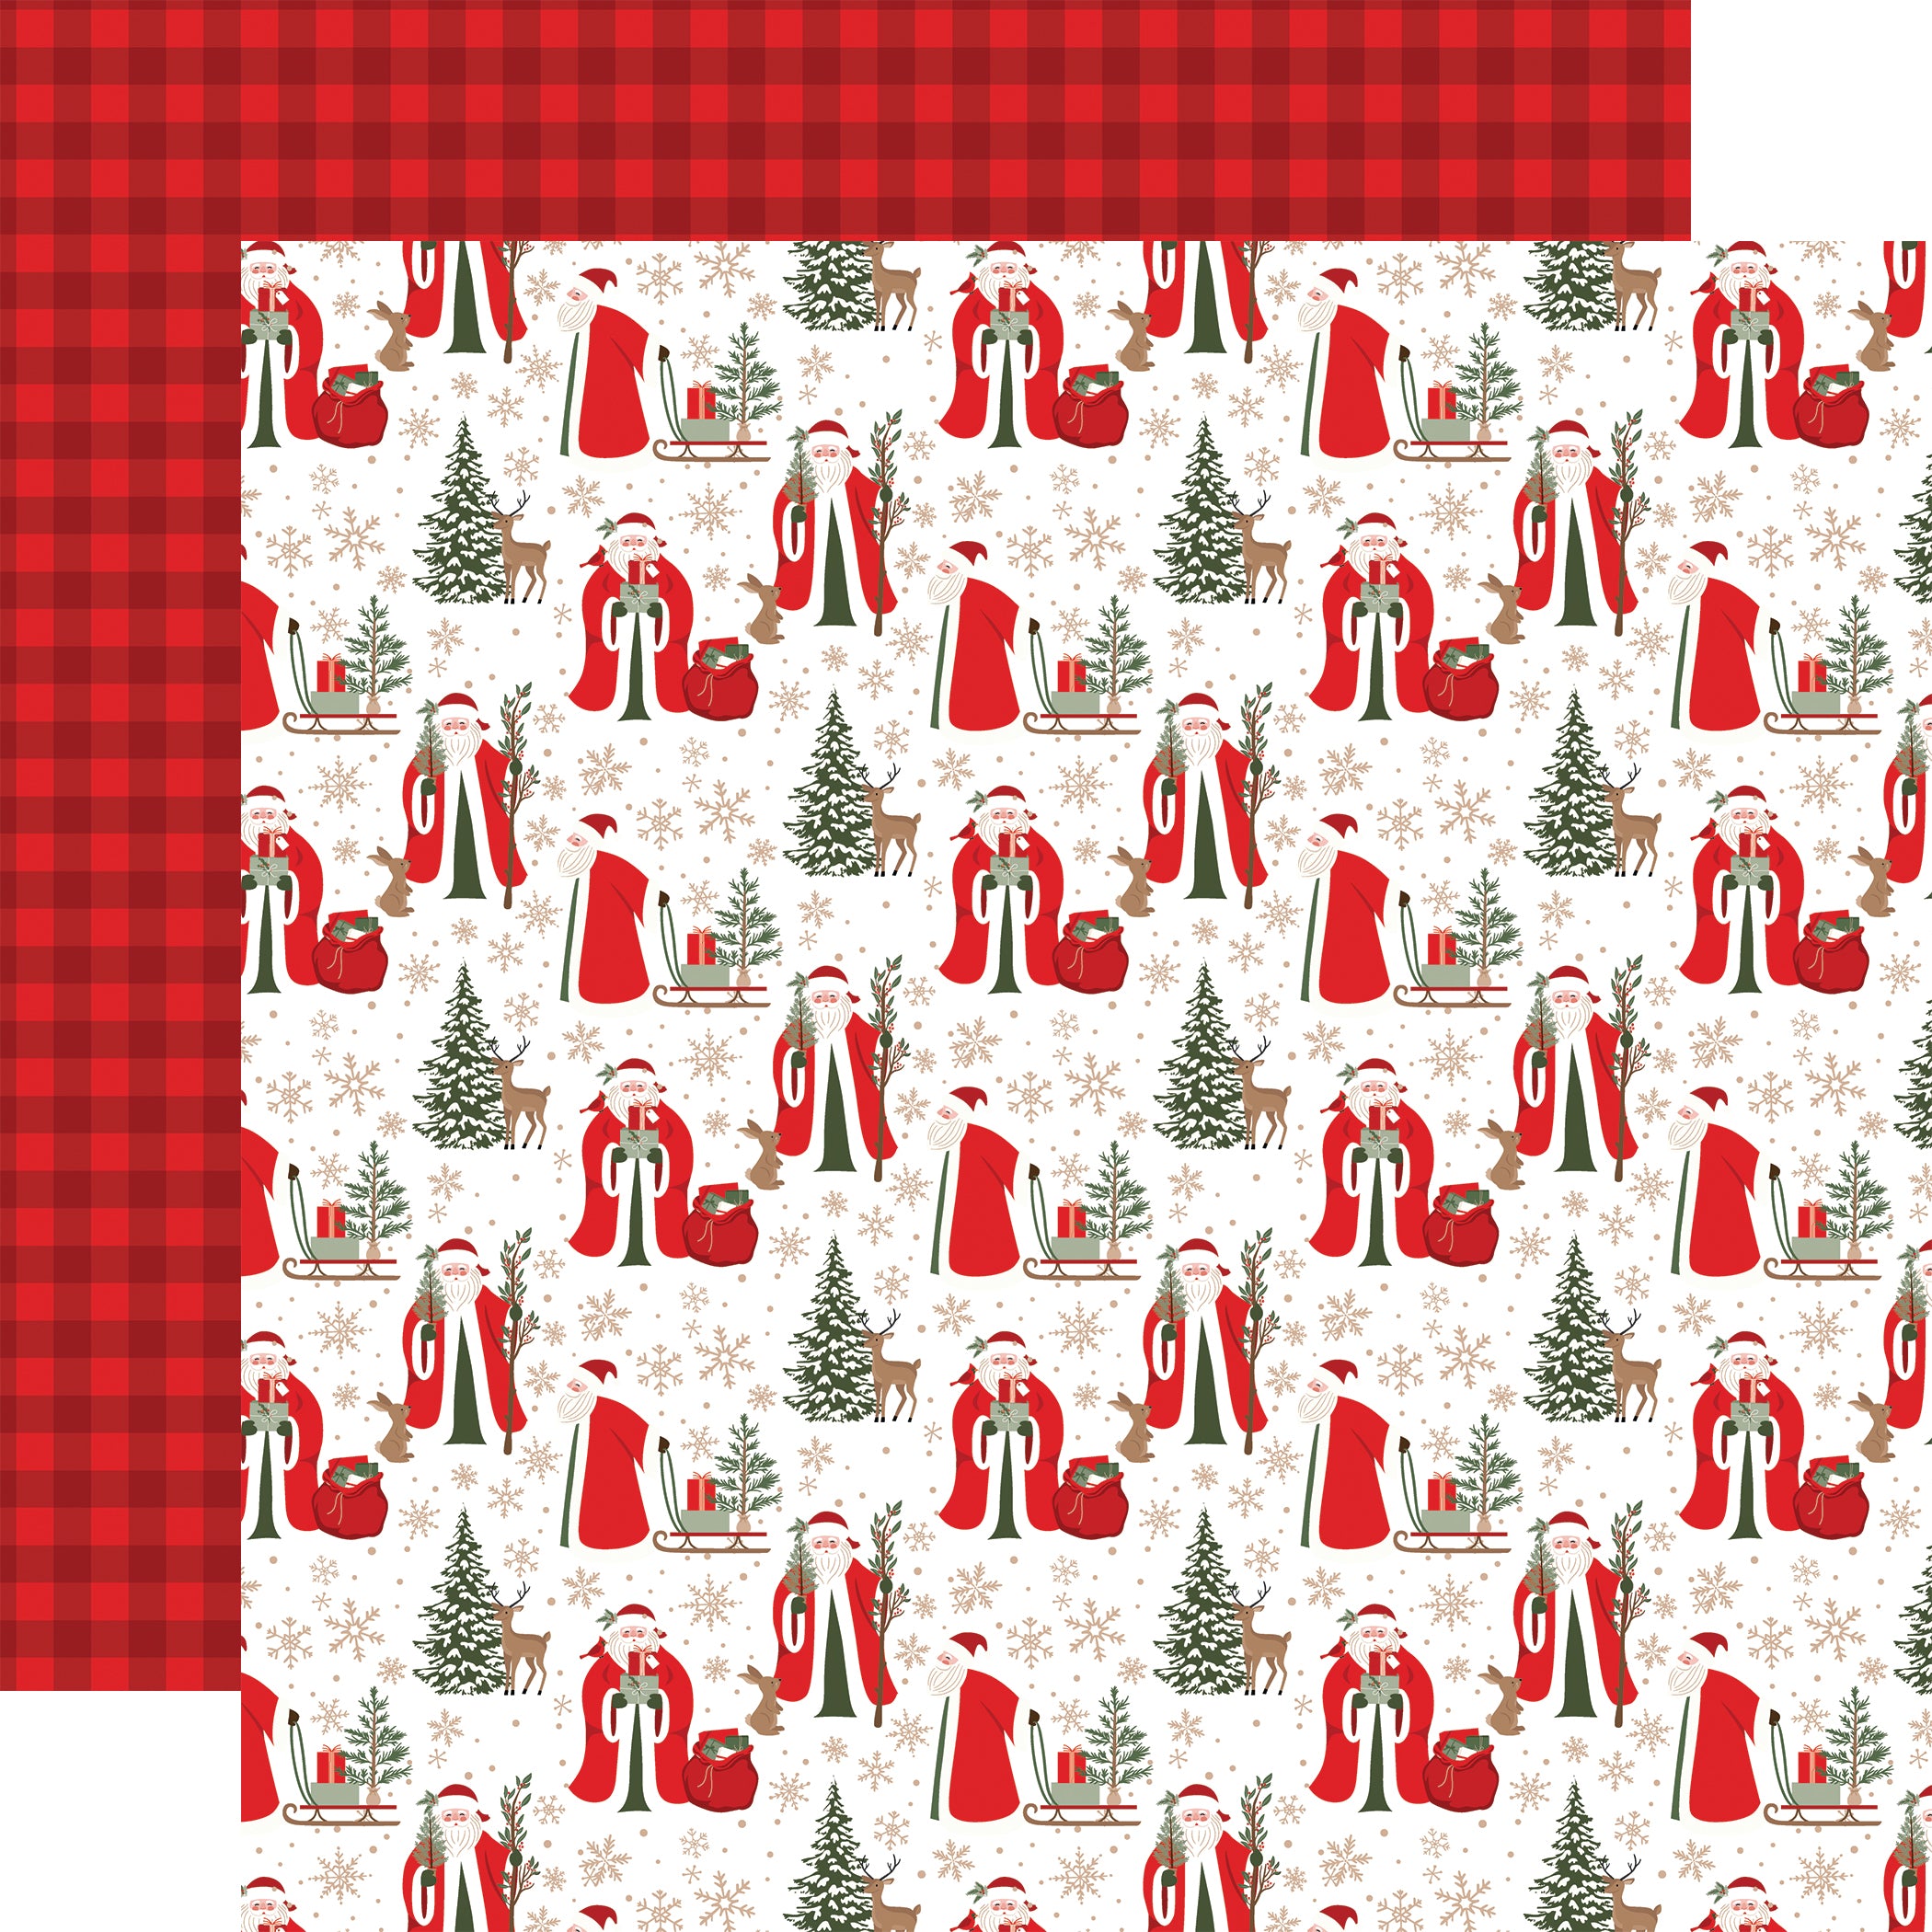 Christmas Time Collection Magical Christmas 12 x 12 Double-Sided Scrapbook Paper by Echo Park Paper